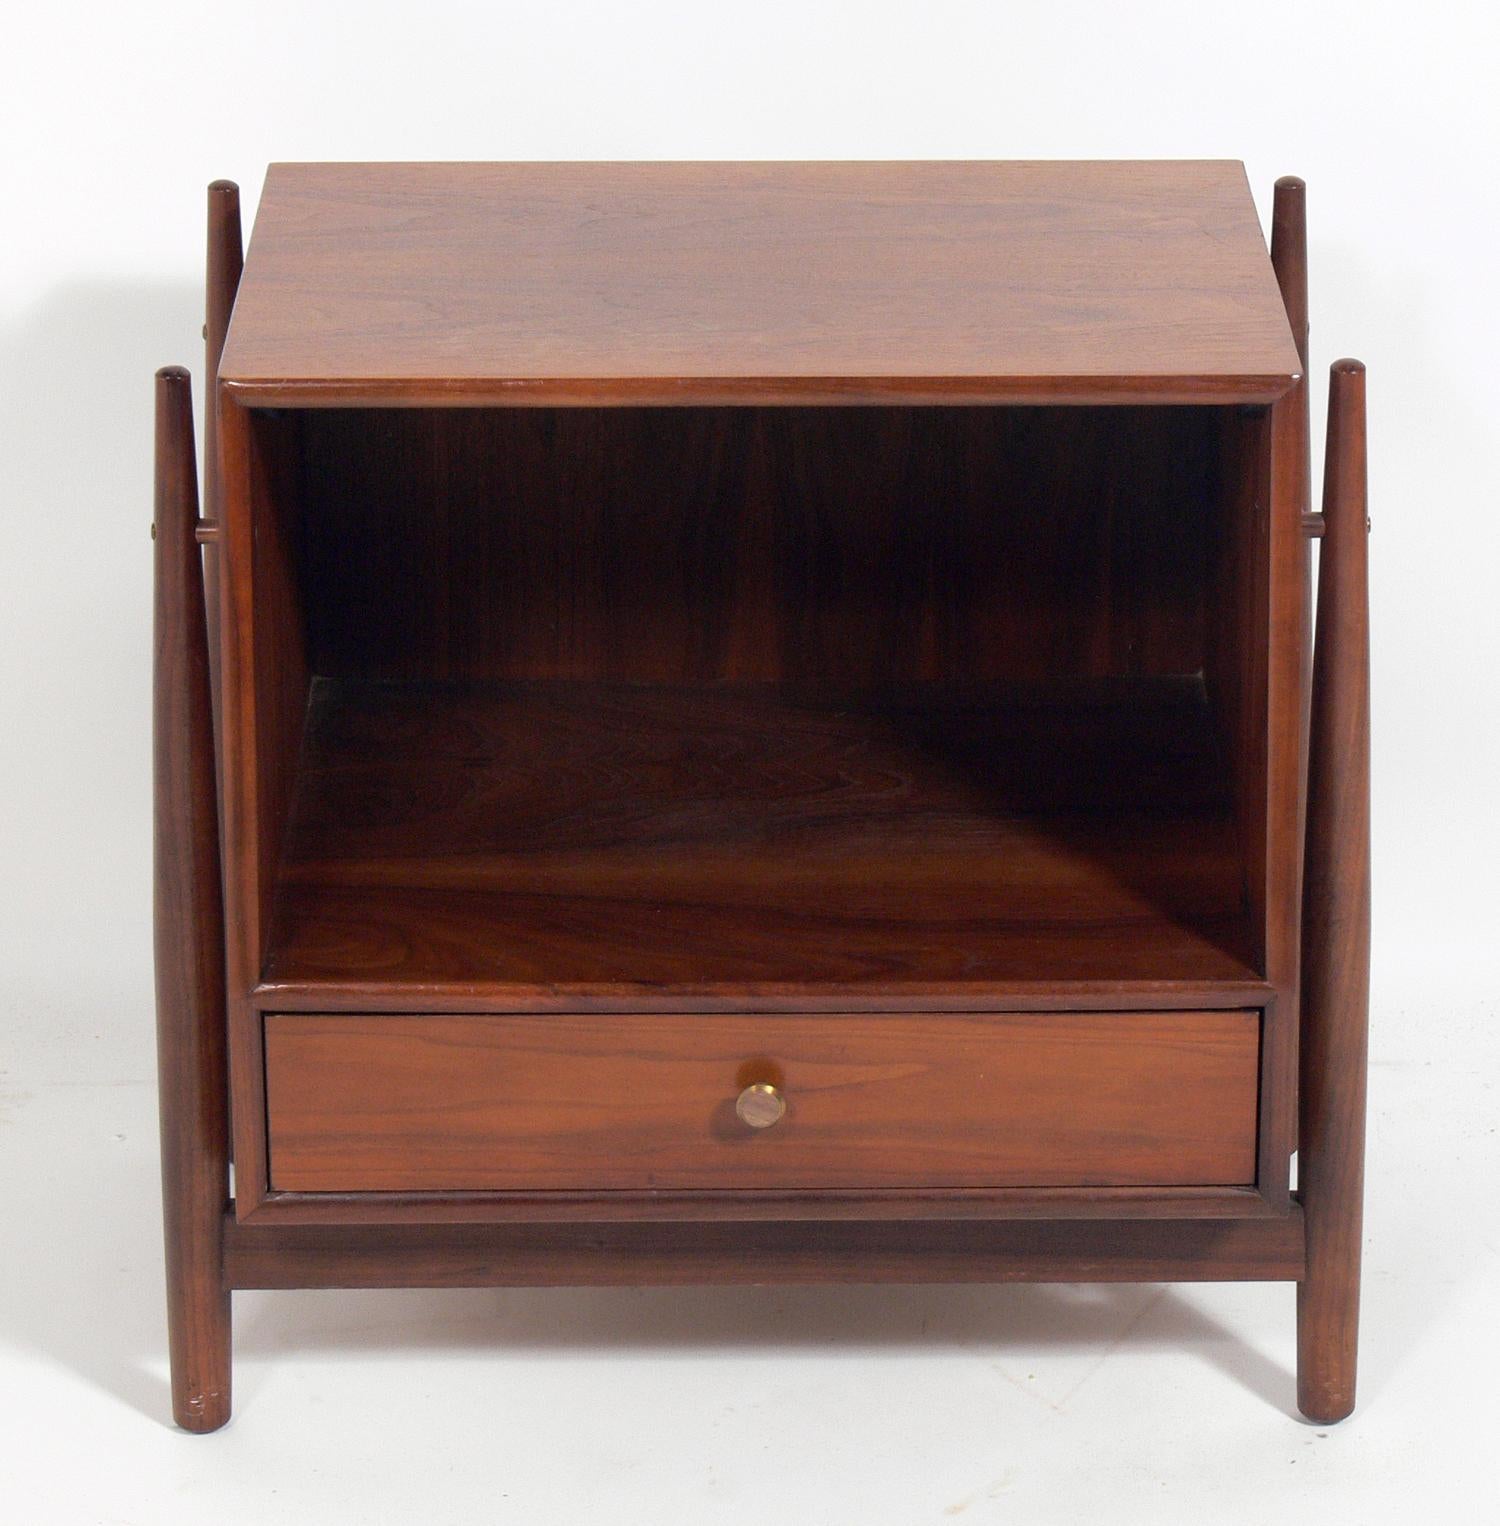 Pair of modern walnut nightstands, designed by Kipp Stewart for Drexel, circa 1960s. They are a versatile size and can be used as nightstands or as end or side tables. They are currently being refinished and can be refinished in your choice of